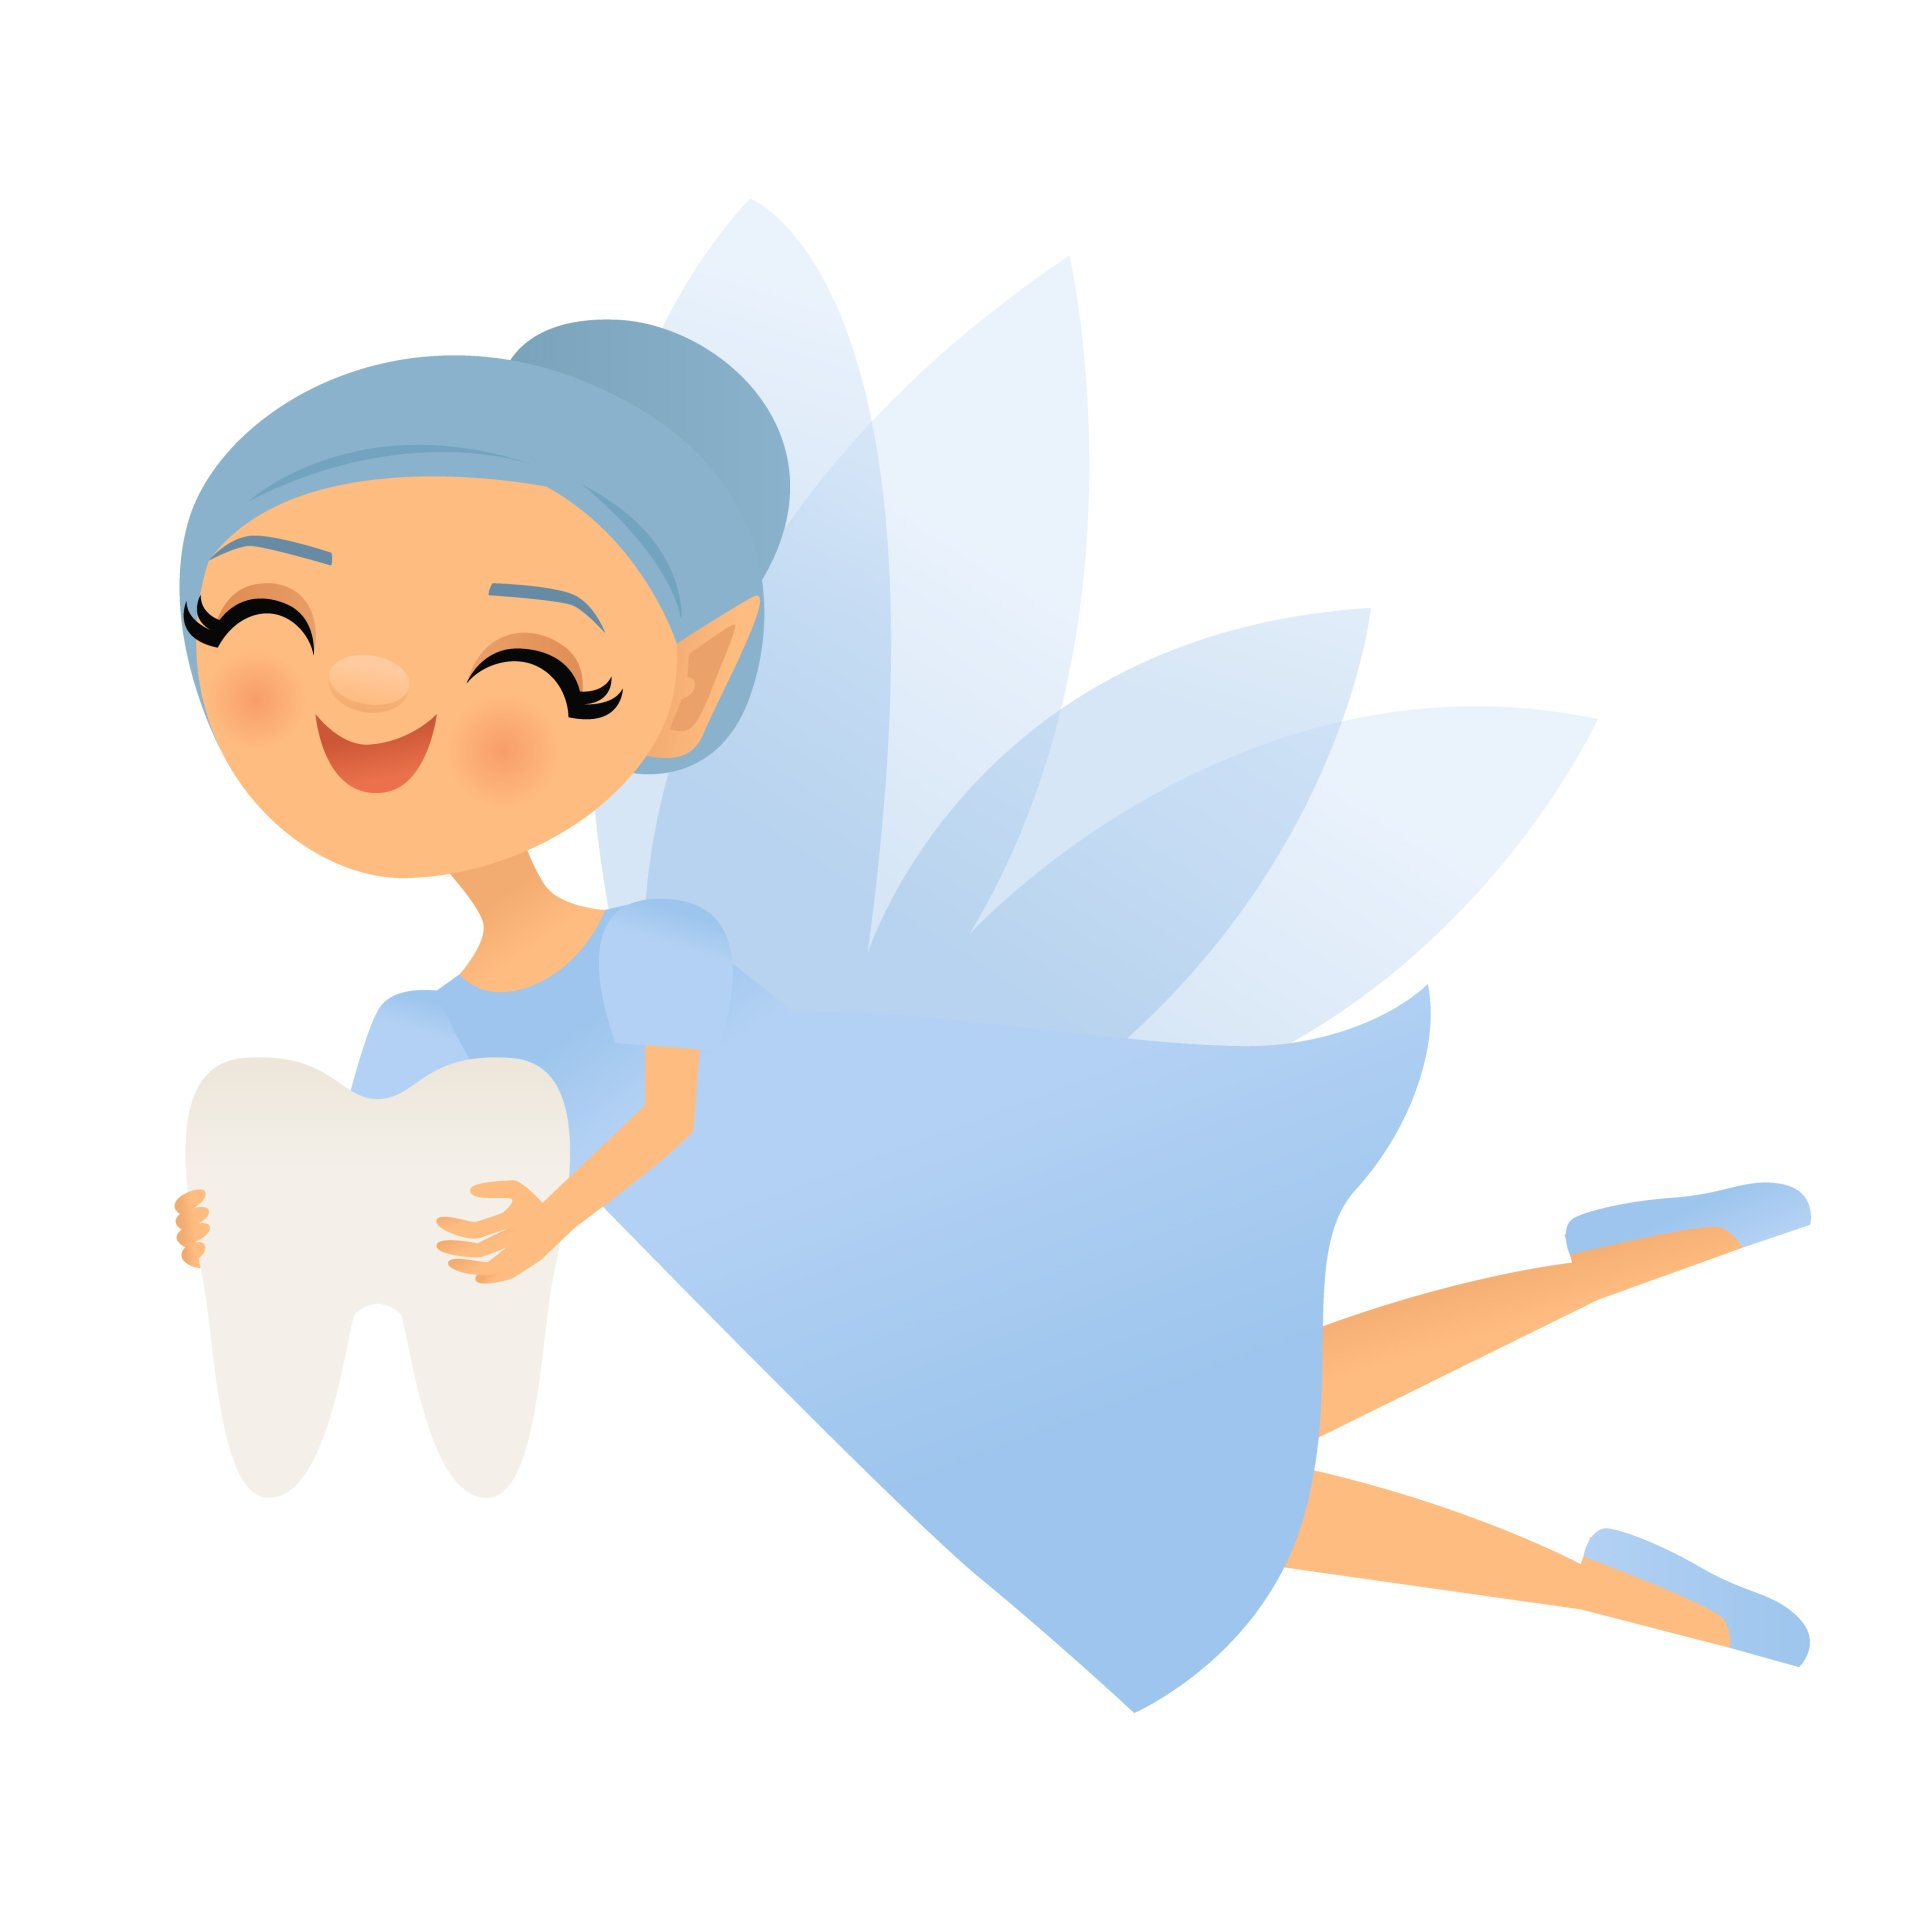 tooth fairy png